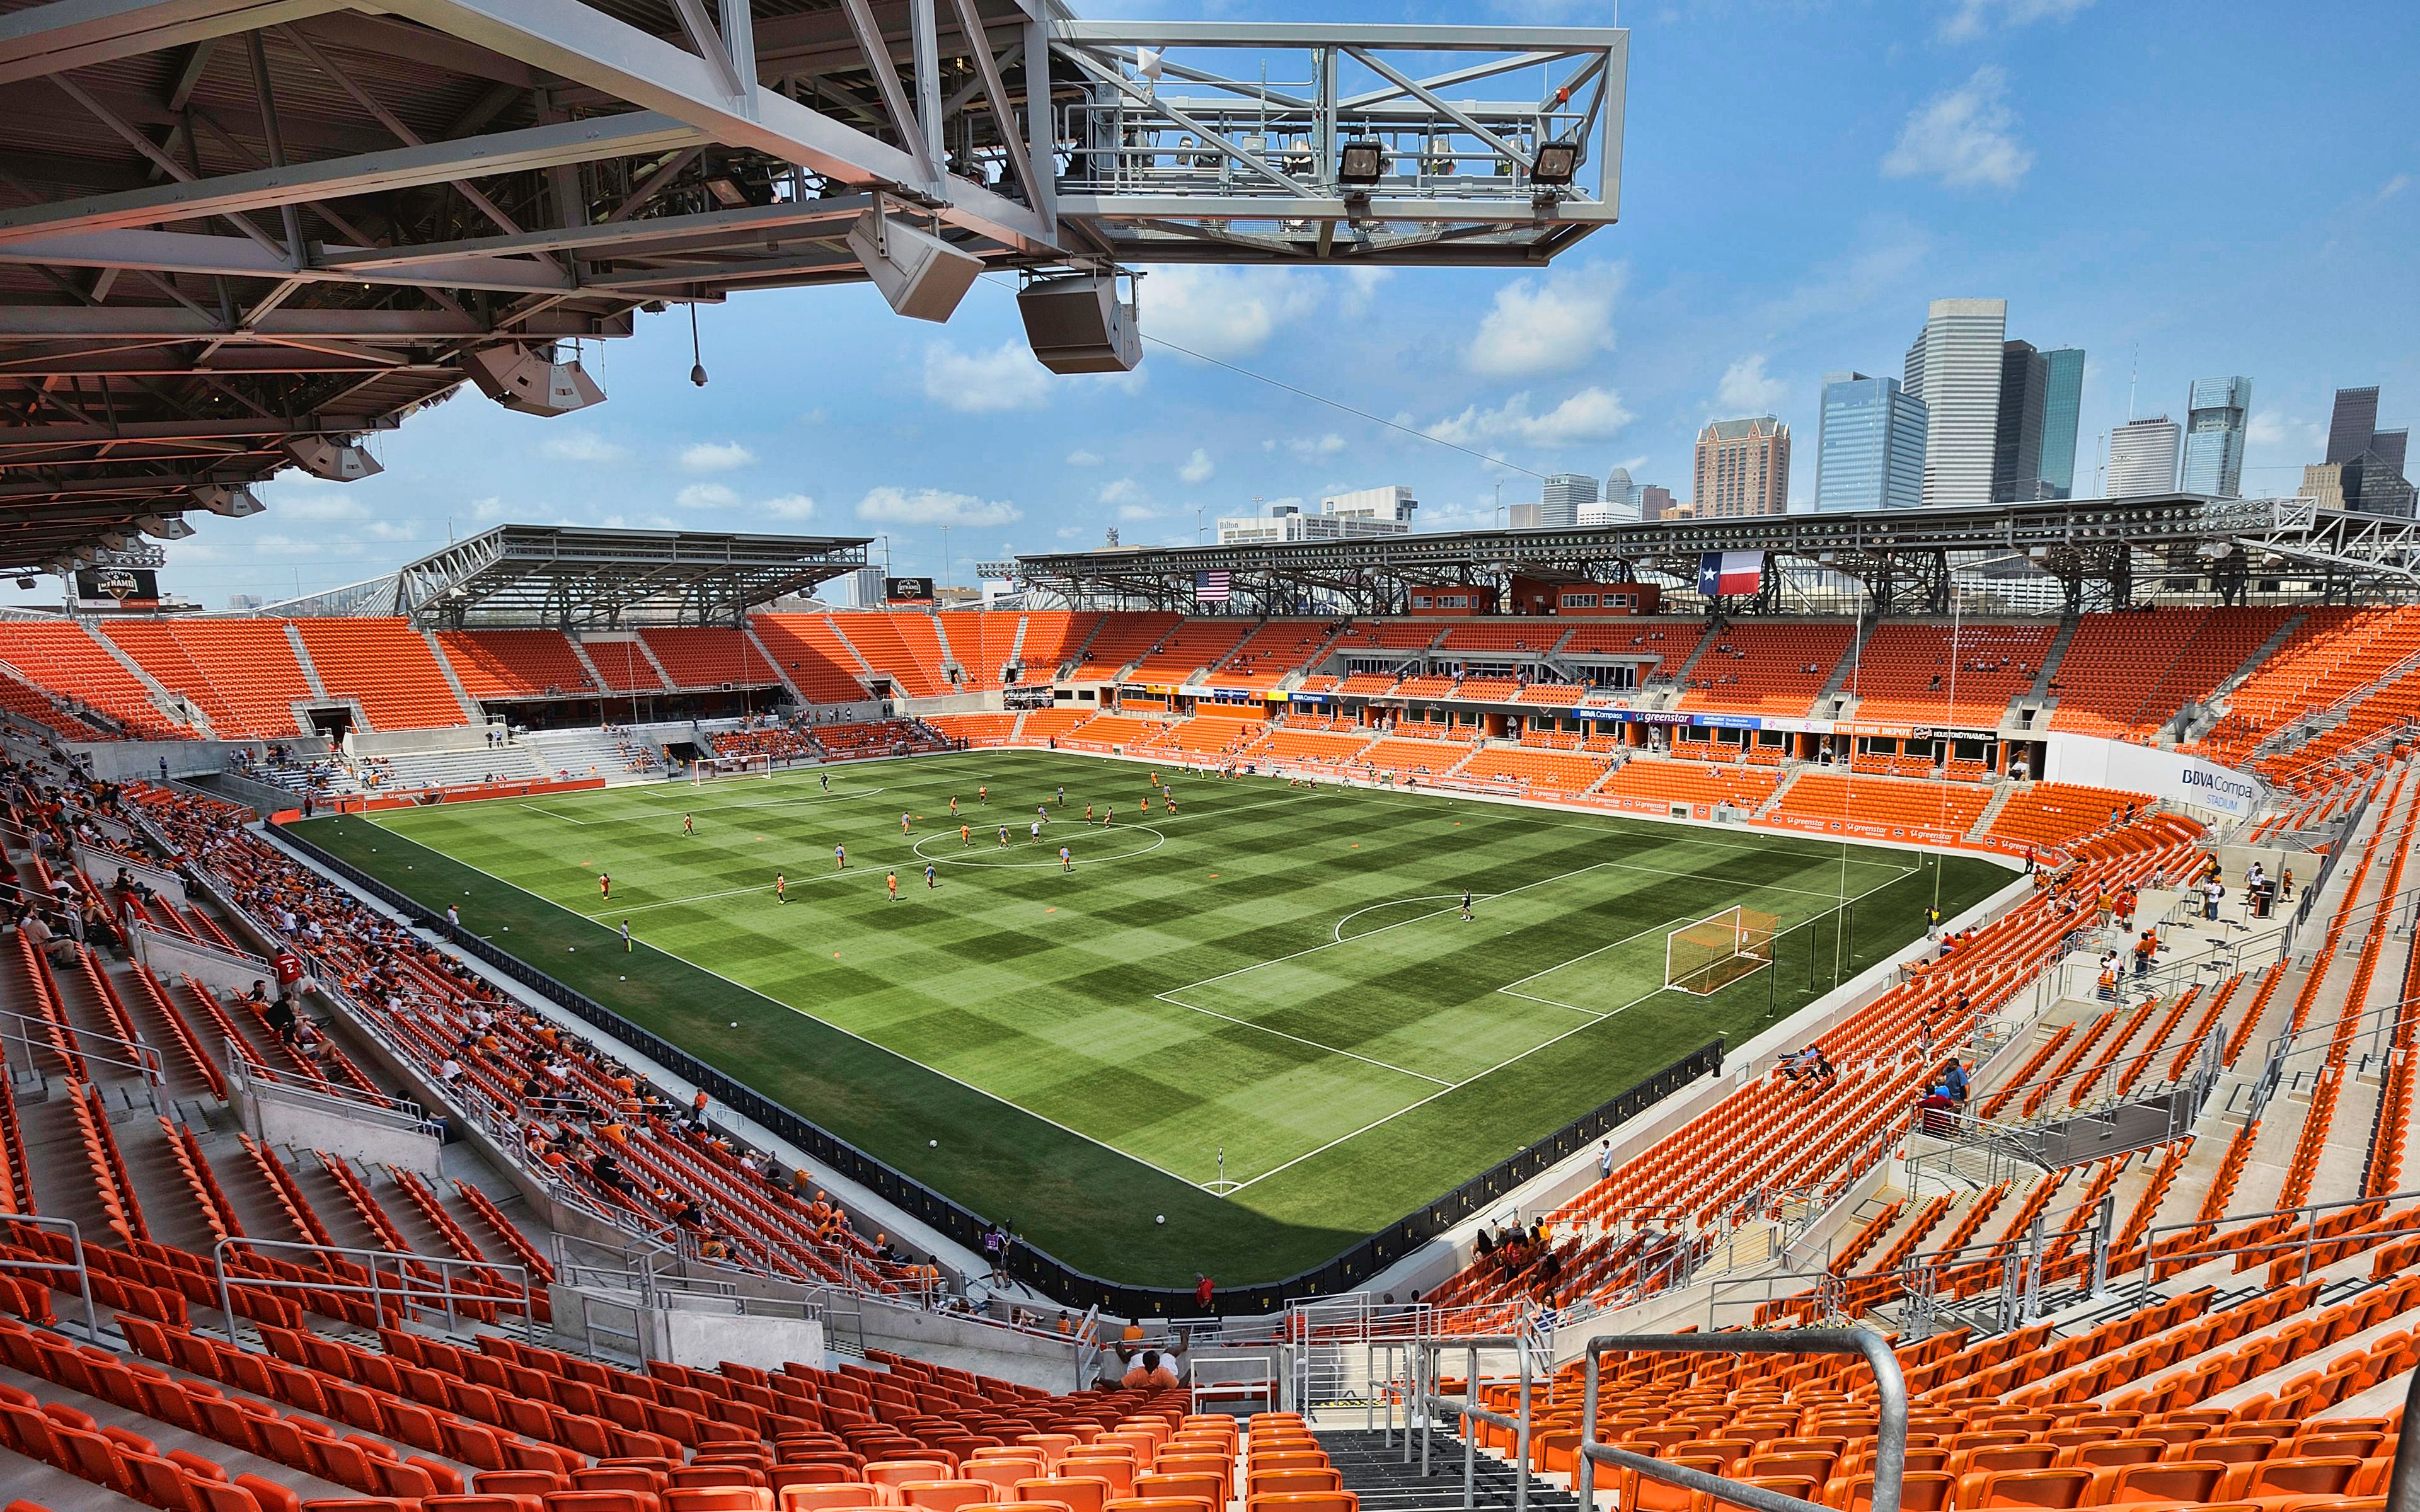 Download wallpaper BBVA Compass Stadium, 4k, HDR, MLS, Houston Dynamo Stadium, soccer, football stadium, USA, Houston, Houston Dynamo FC, american stadiums for desktop with resolution 3840x2400. High Quality HD picture wallpaper